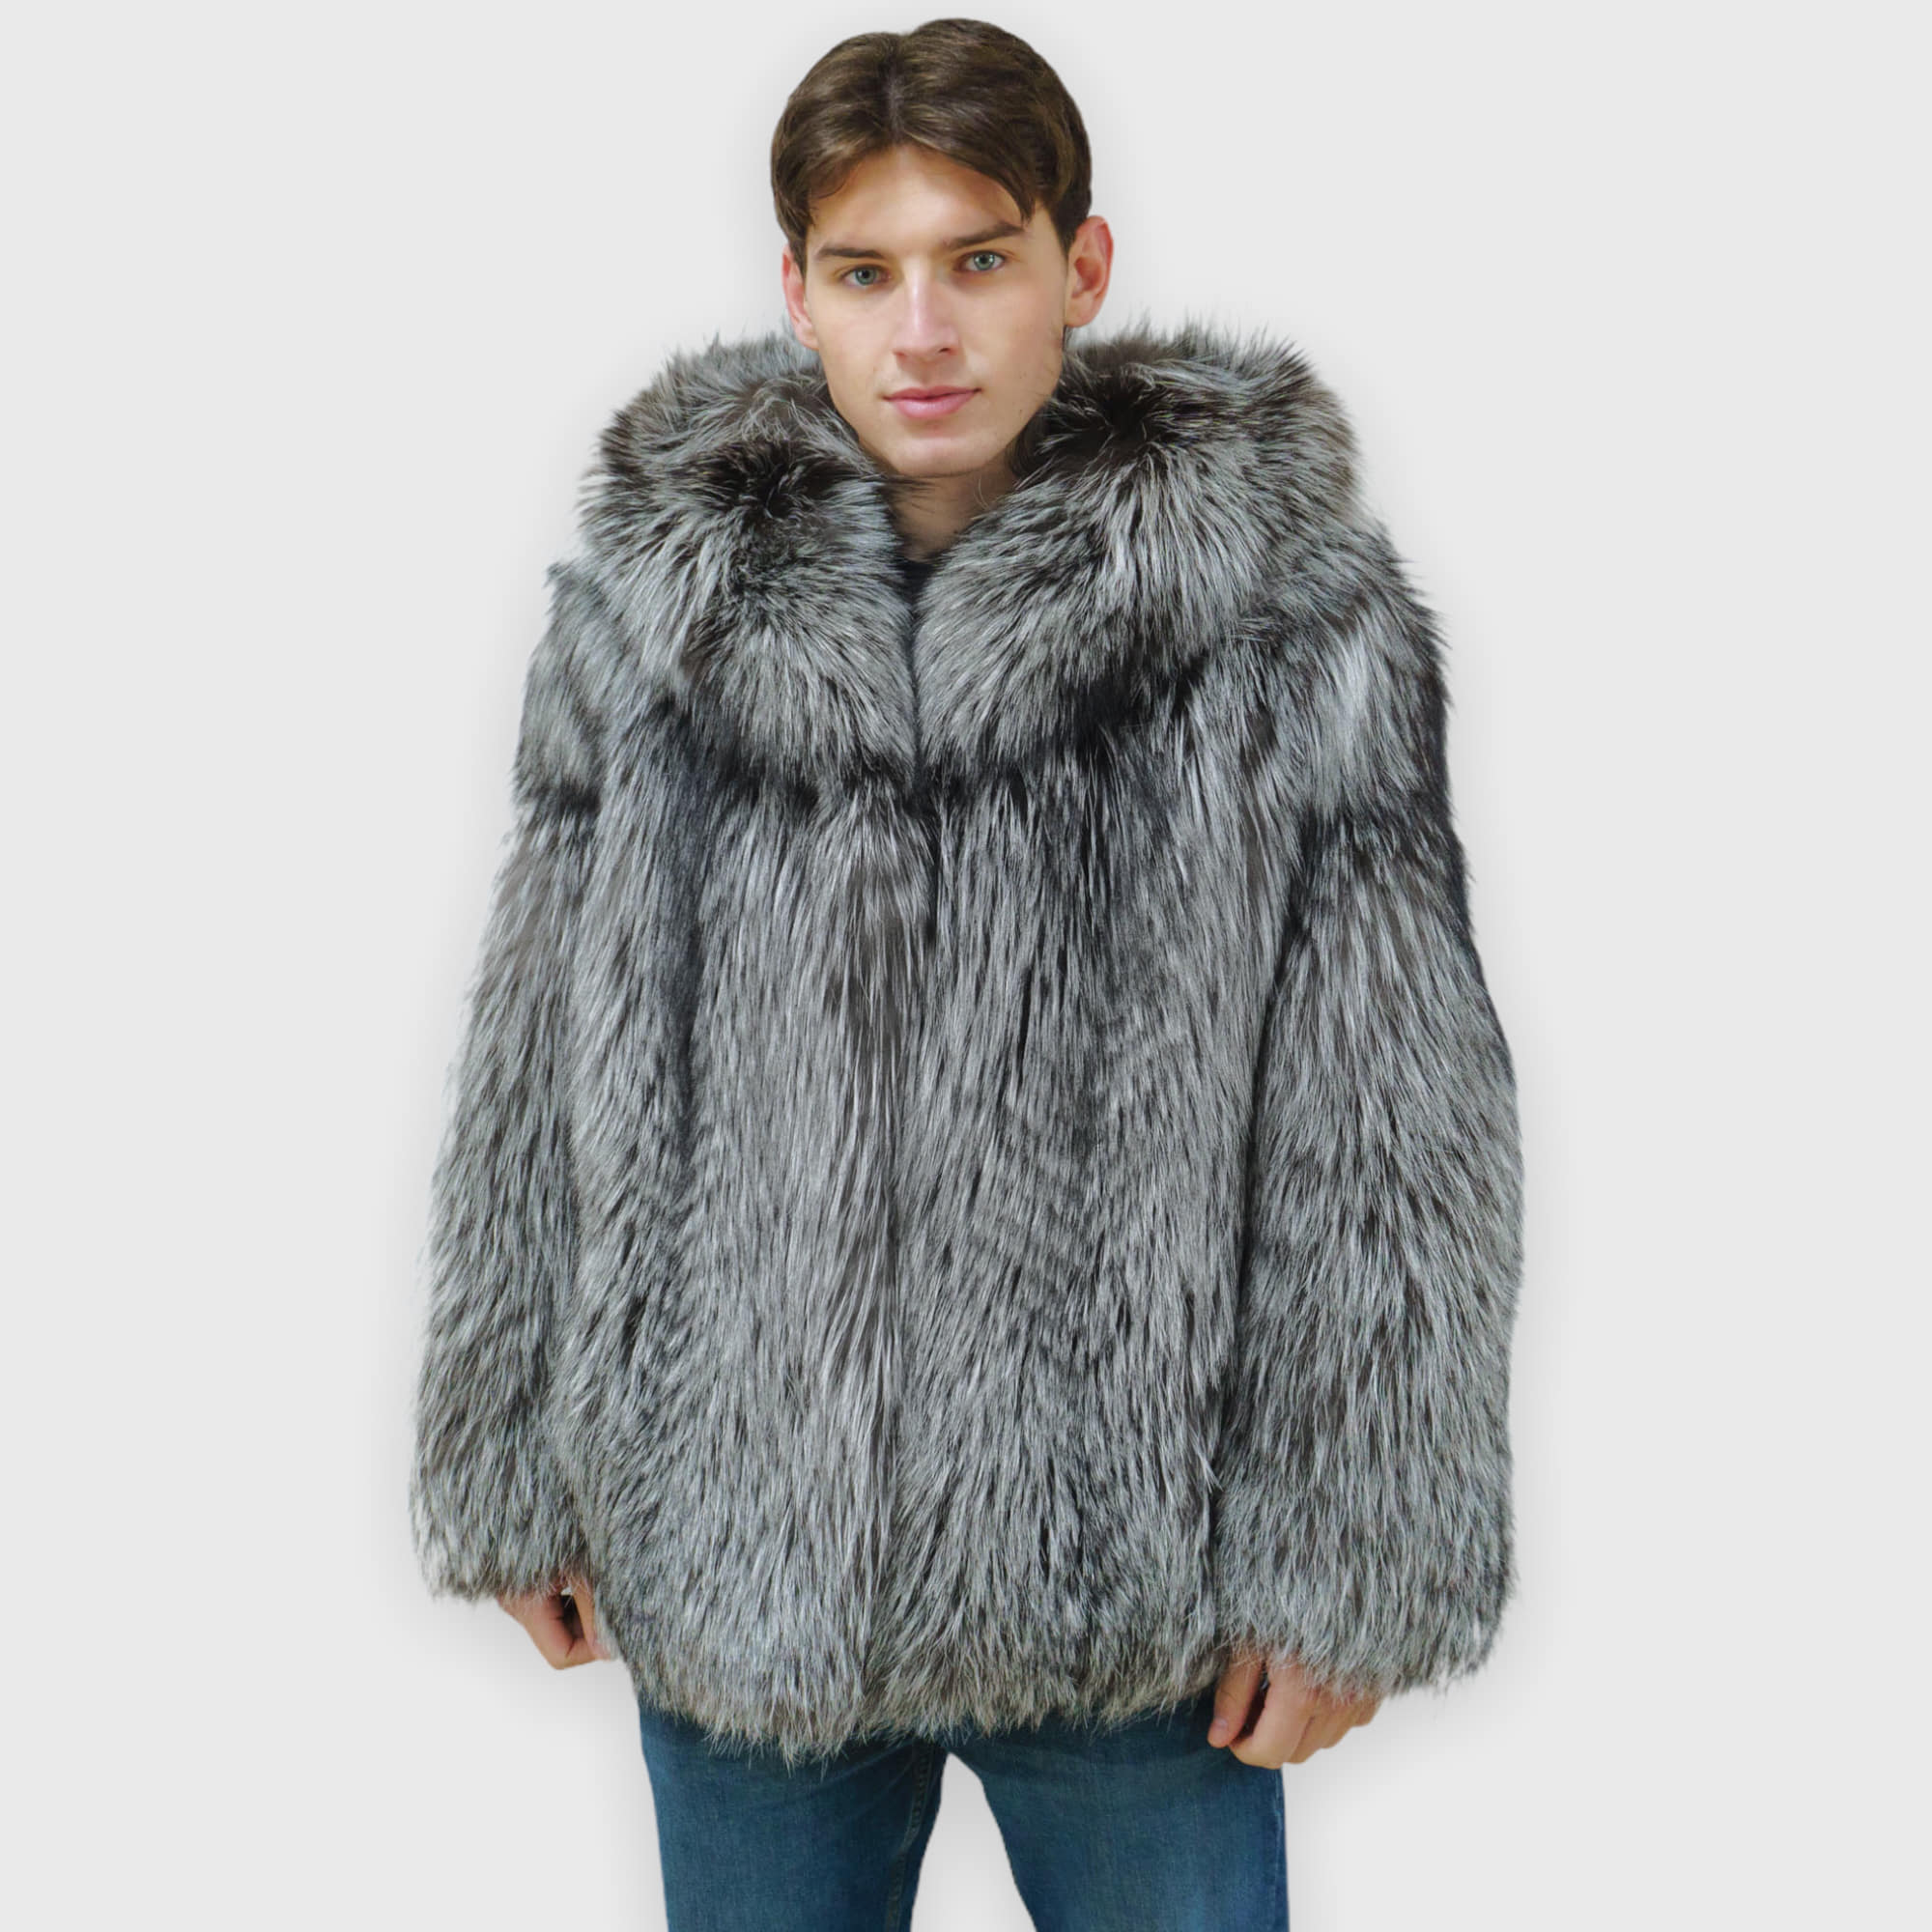 Fox fur jacket with a hood in silver color